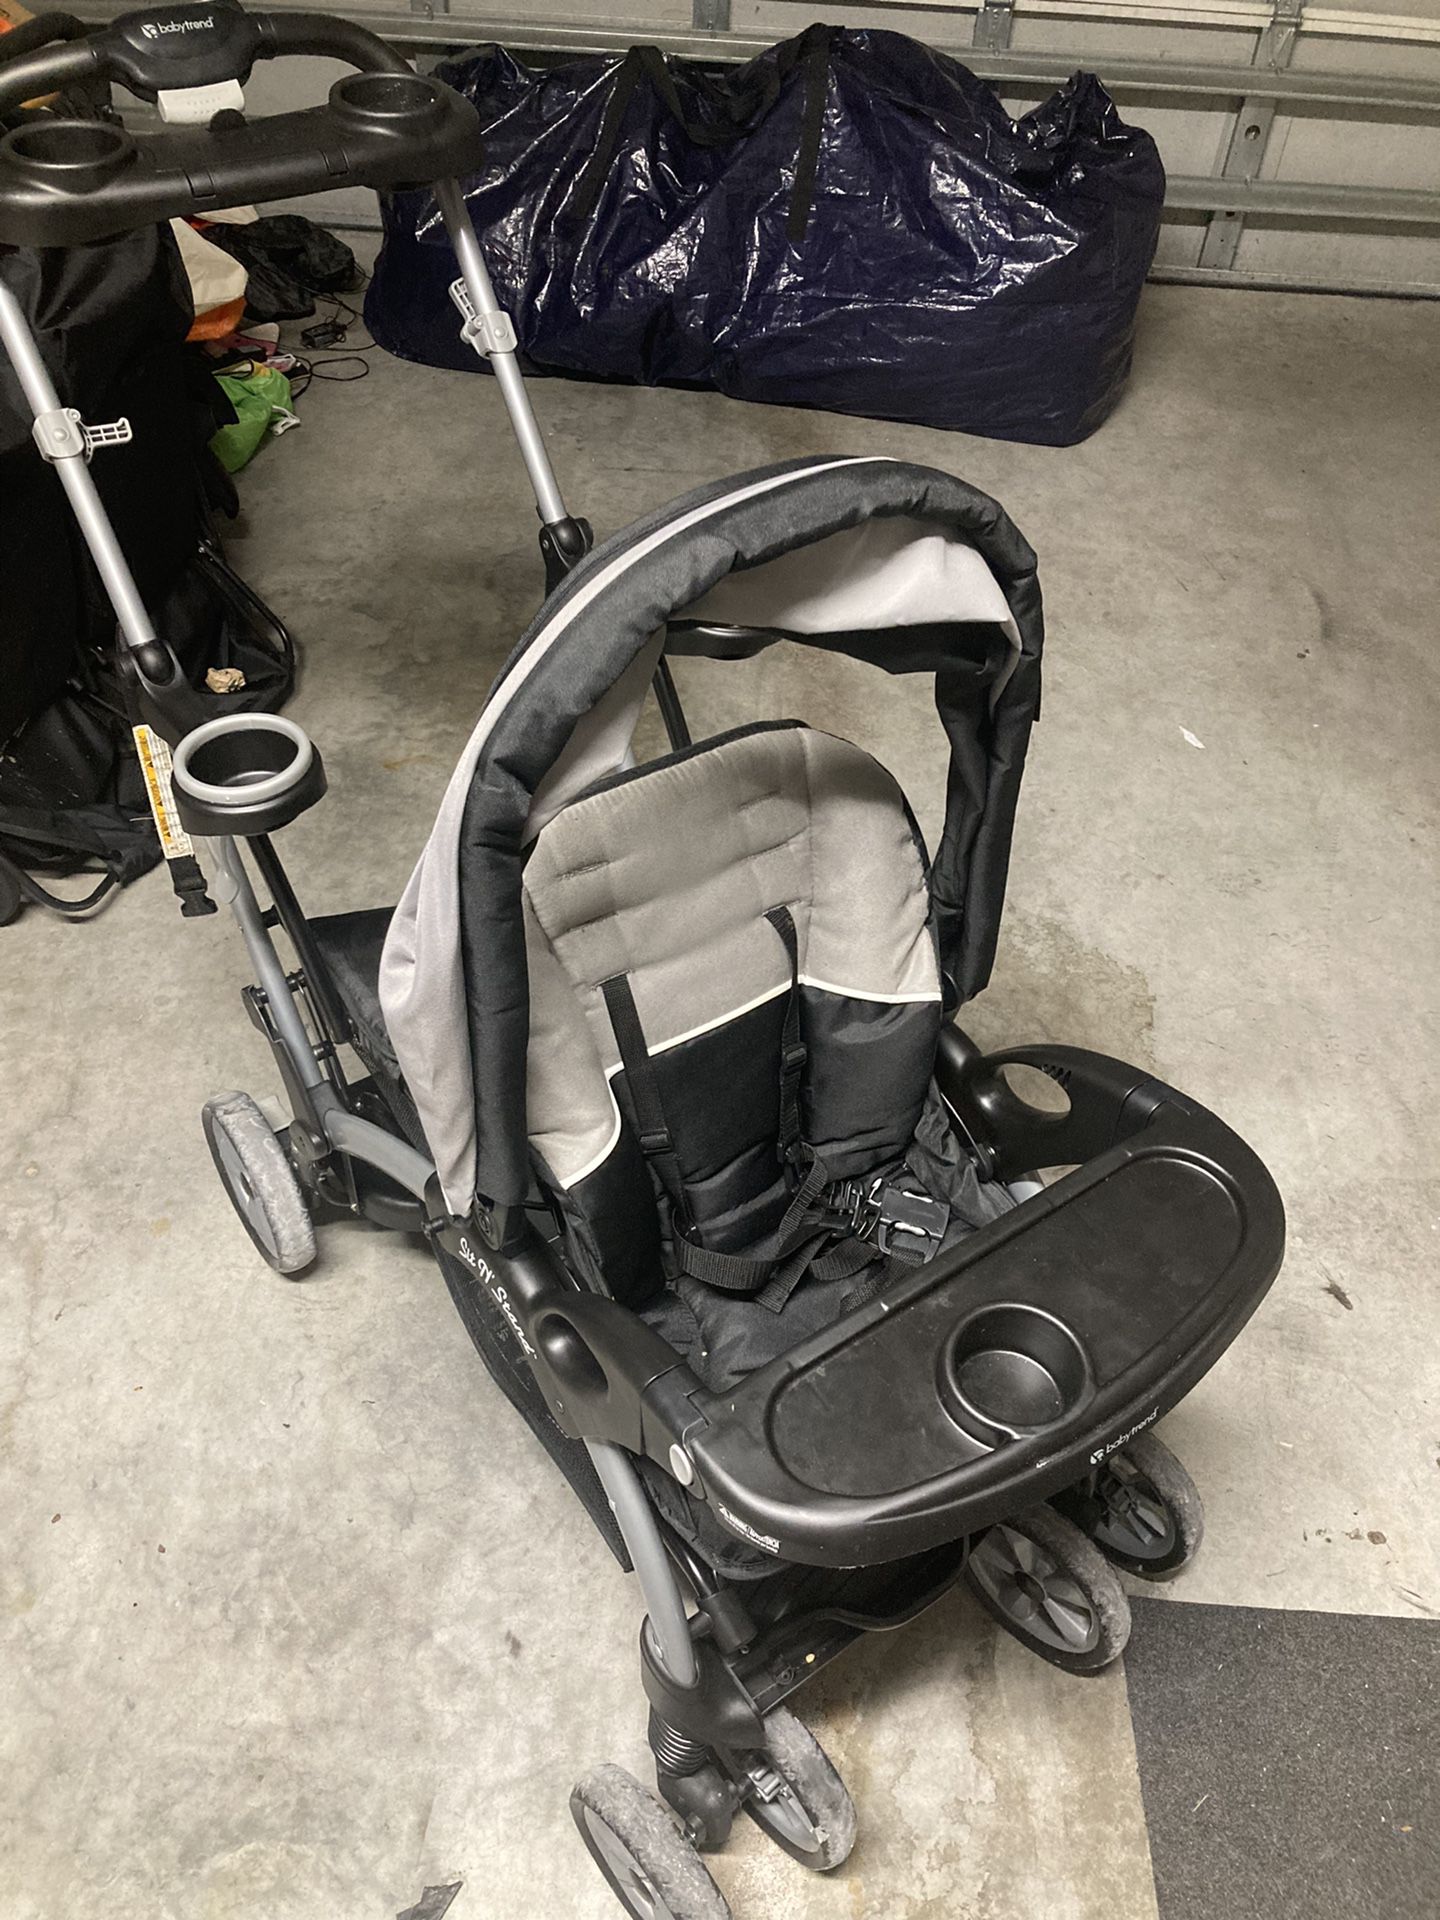 Baby Trend Double Seat Stroller 